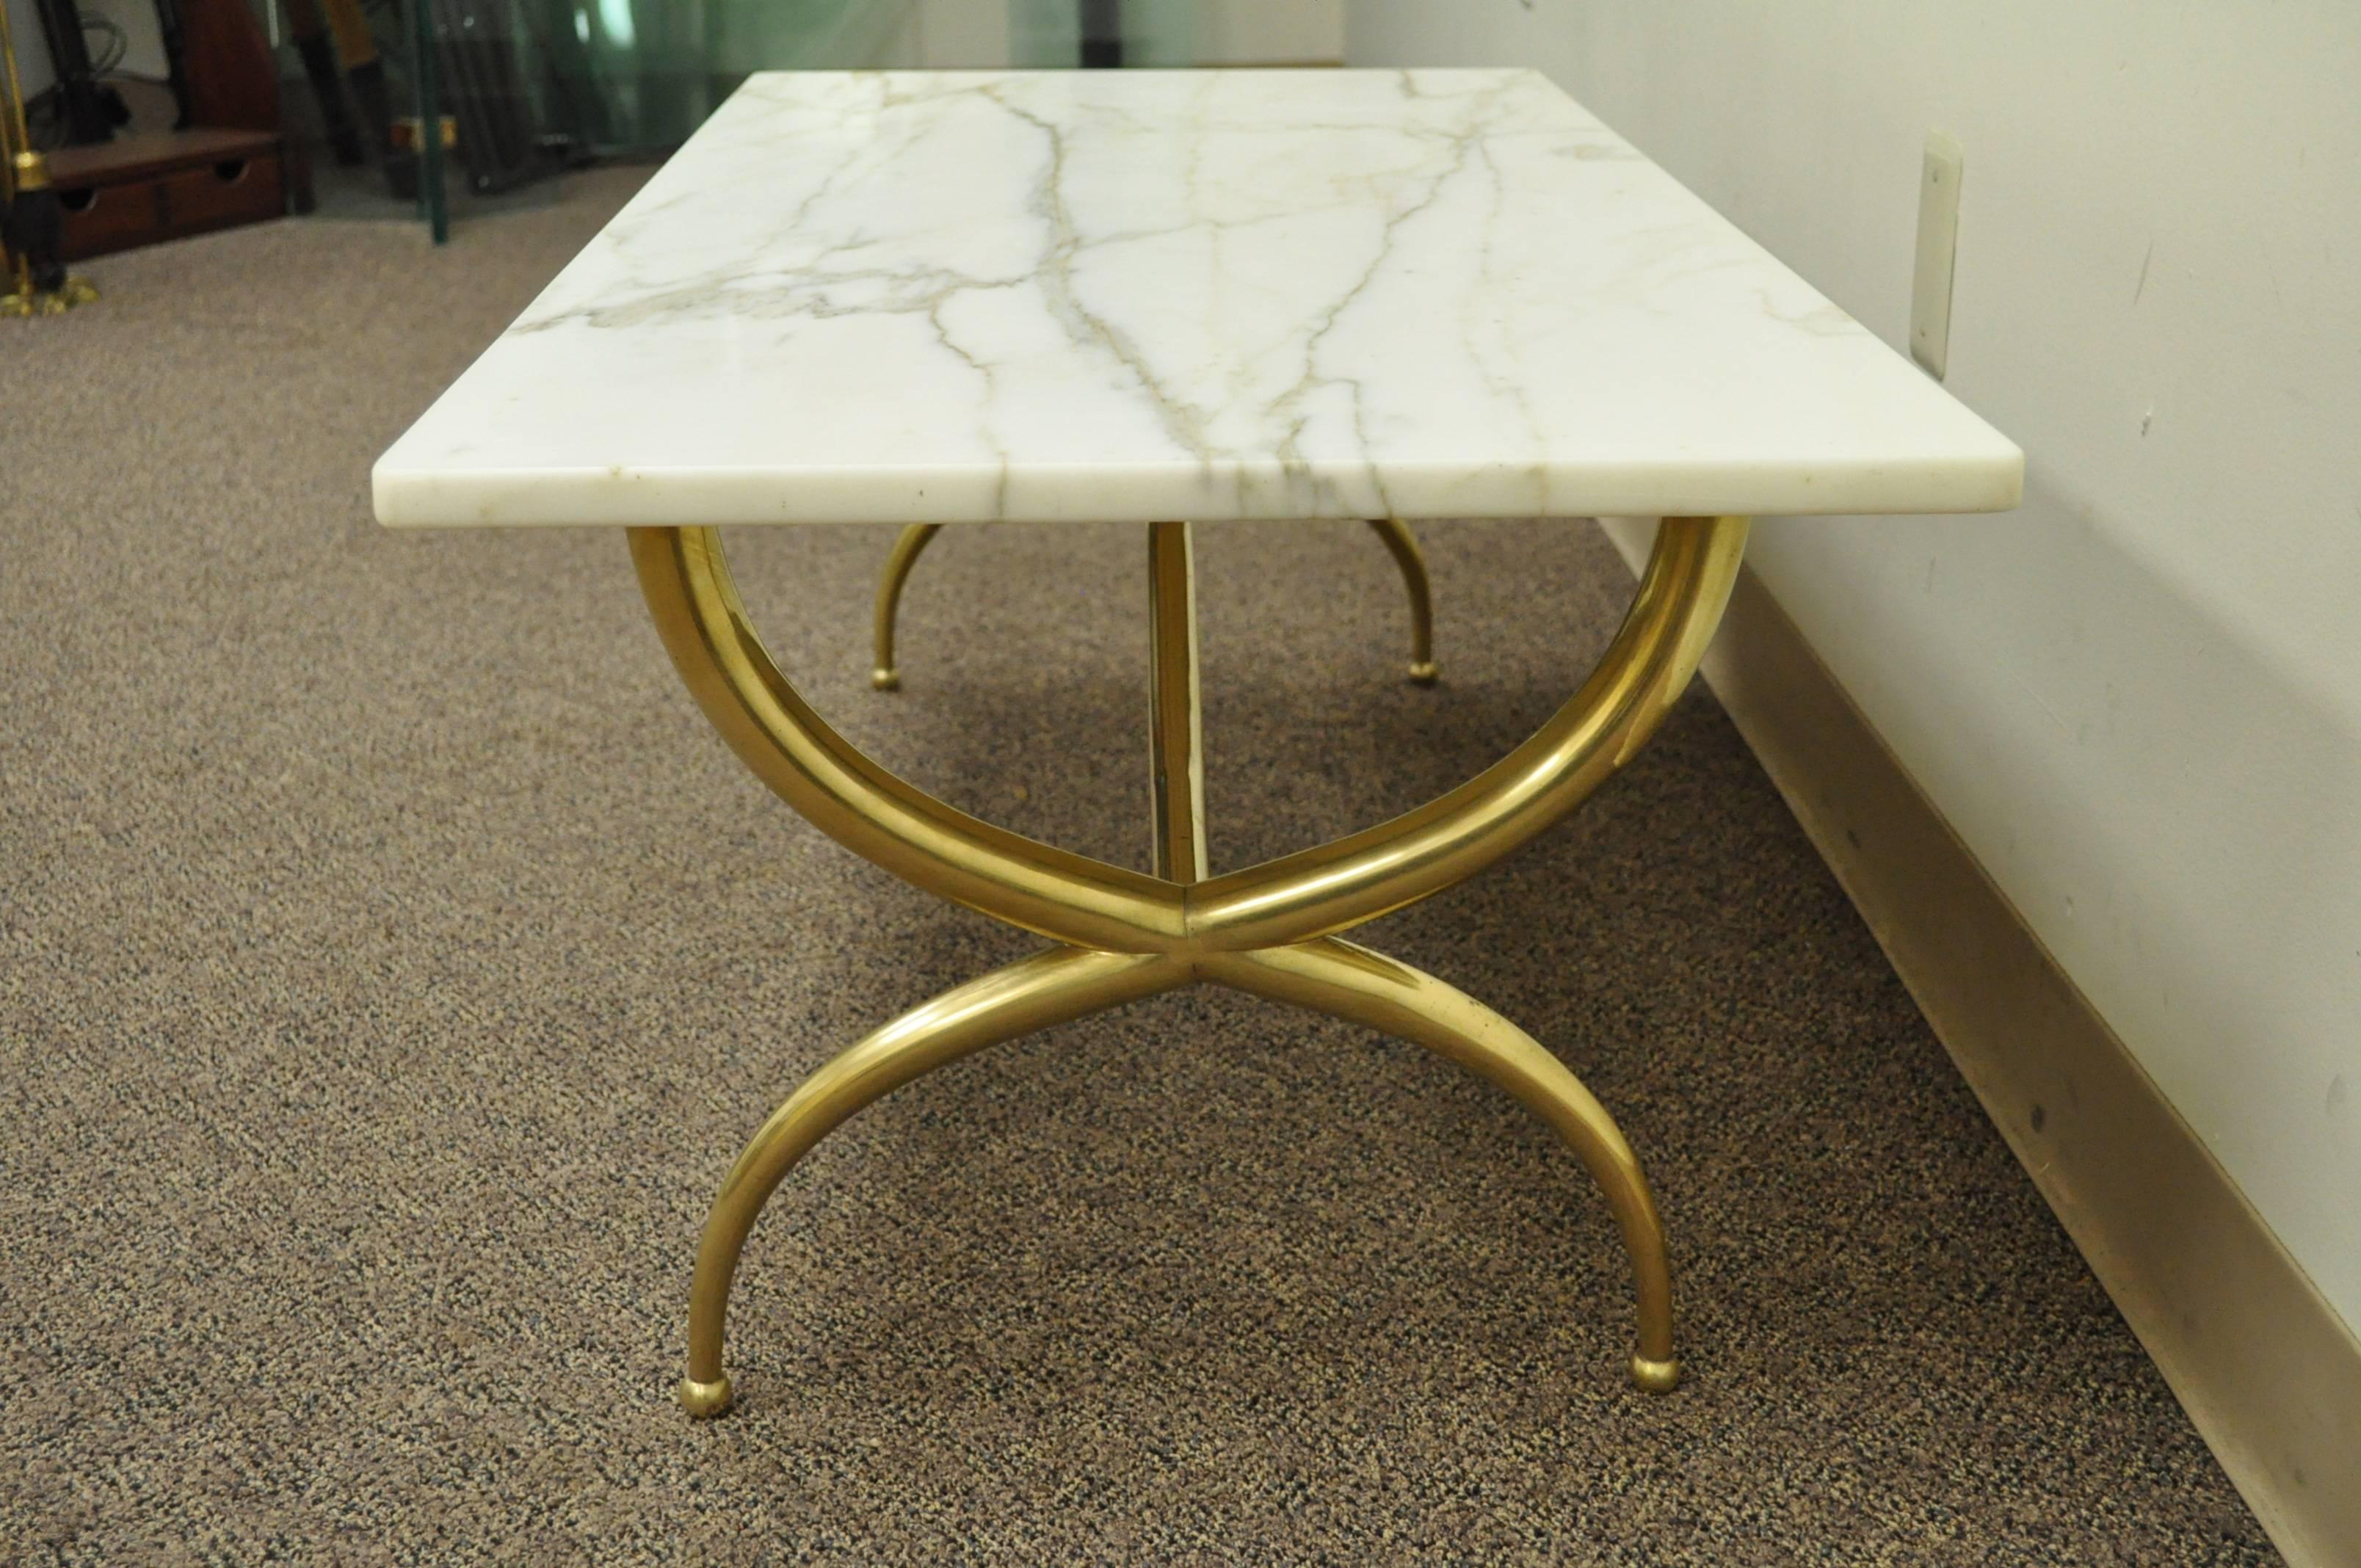 Stunning Brass and Marble Italian Modernist Rectangular Coffee Table in the style of Gio Ponti. The table features X-Form Legs terminating at ball form feet, shaped stretcher base, and a beautiful .75